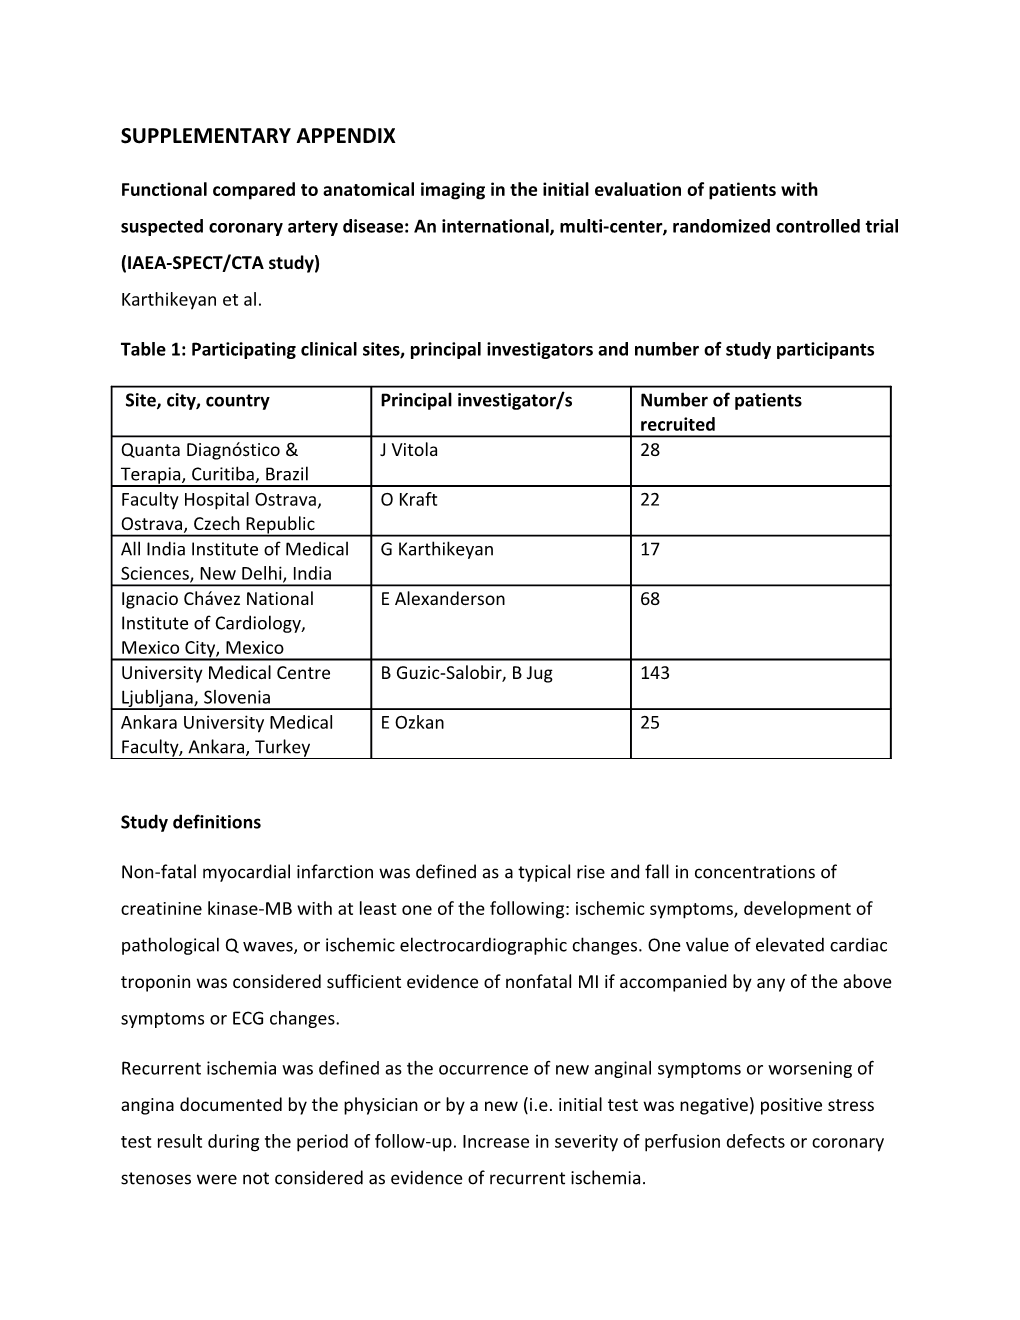 Table 1: Participating Clinical Sites, Principal Investigators and Number of Study Participants